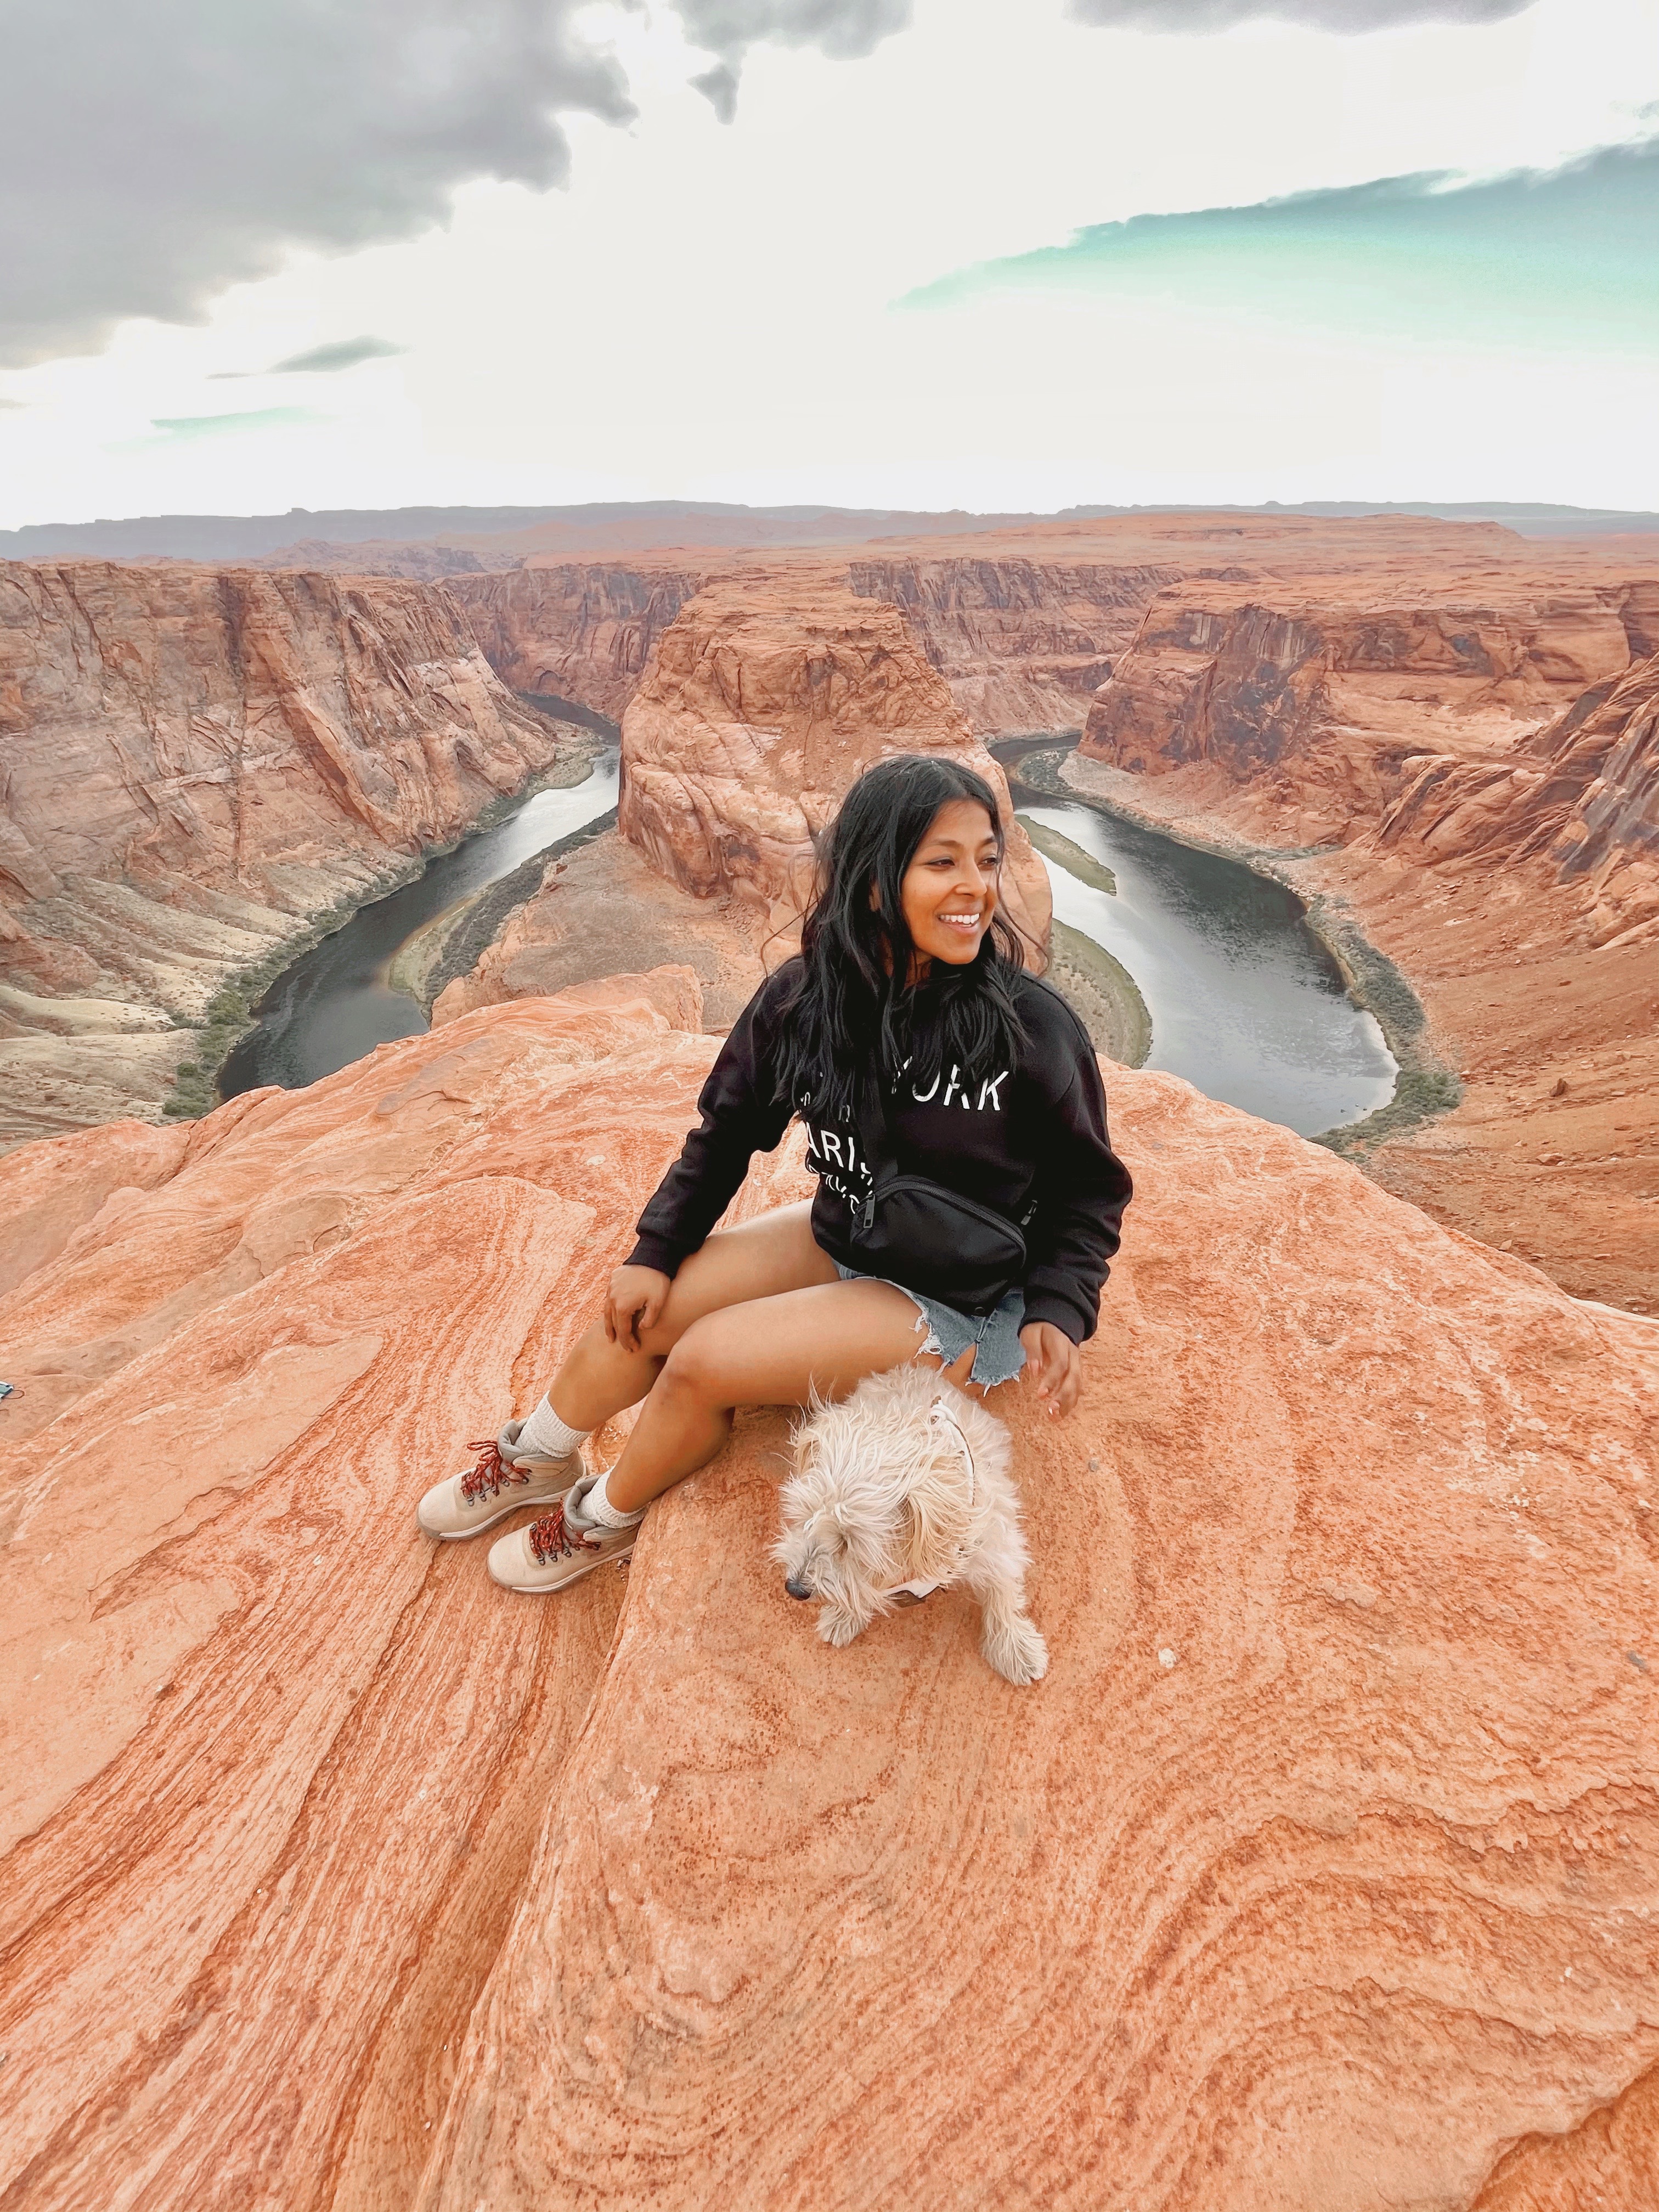 Sharon And Teddy are at Horseshoe Bend In Arizona enjoying the view of the u-shaped rocks.